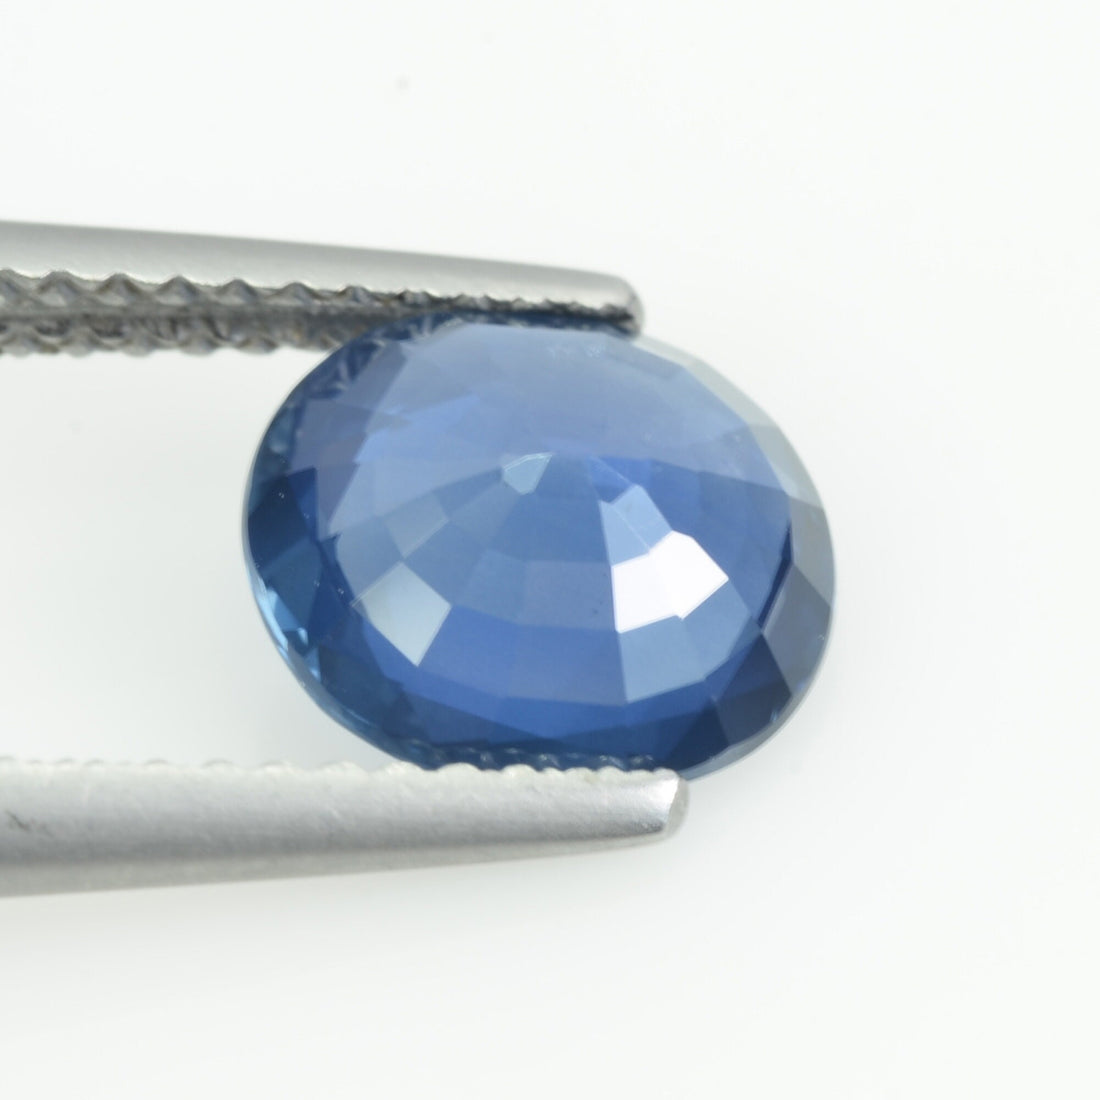 2.24 cts Natural Blue Sapphire Loose Gemstone Oval Cut